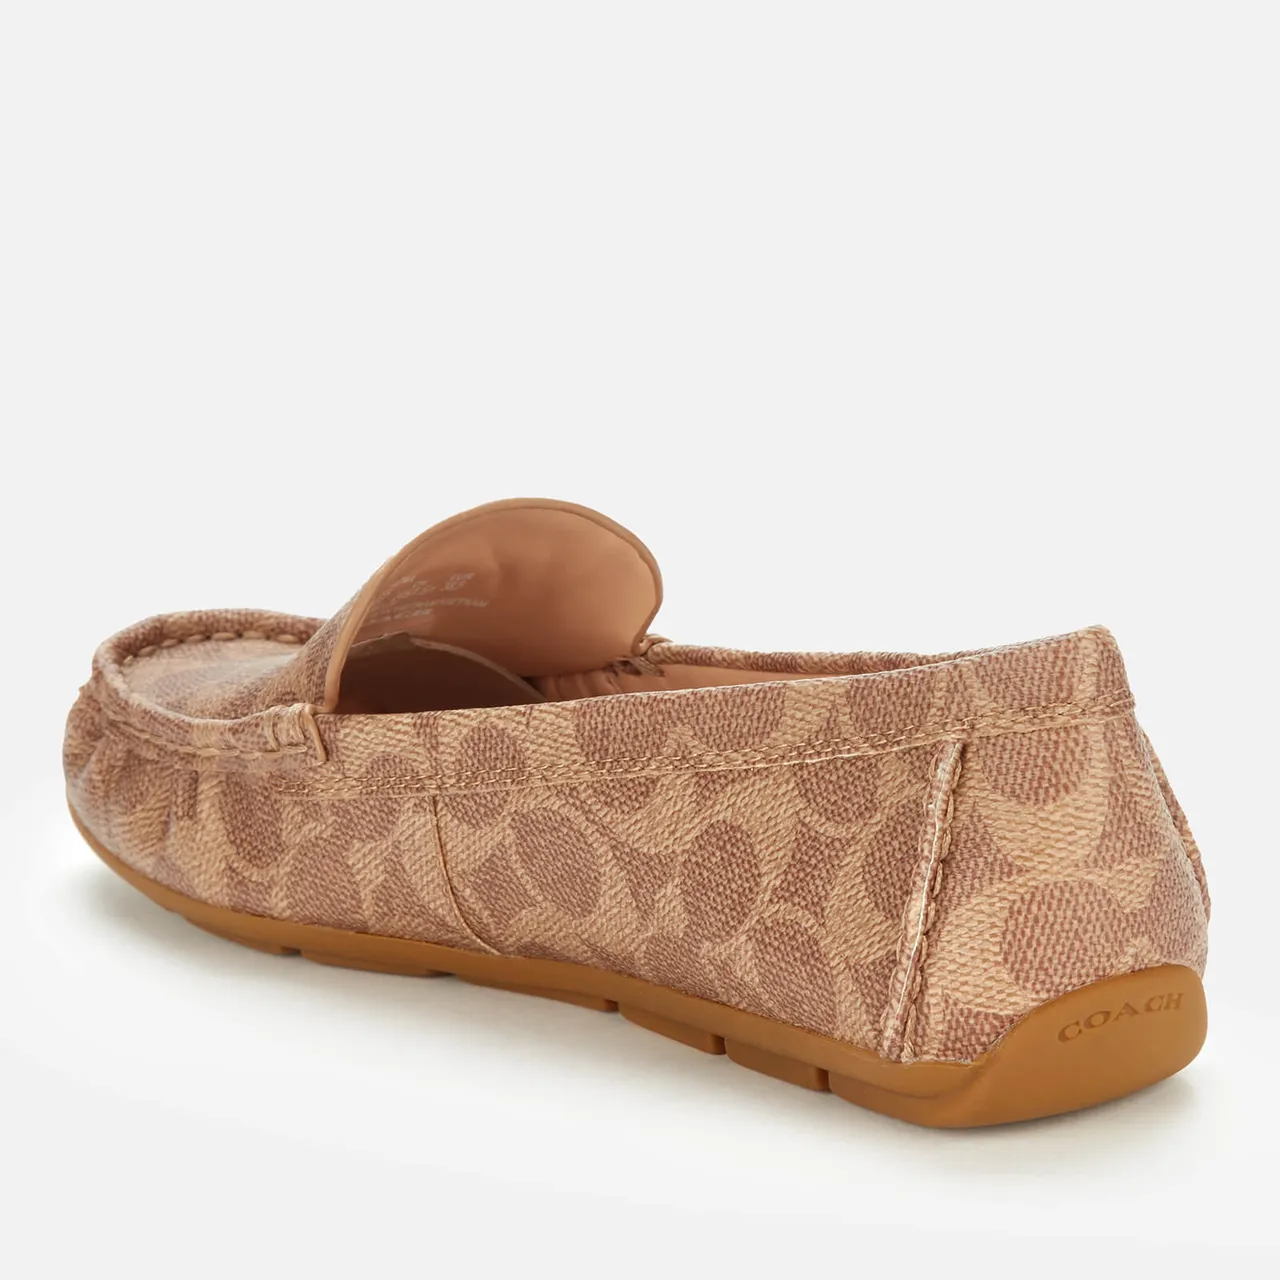 Coach Women's Marley Coated Canvas Driving Shoes - Tan - UK